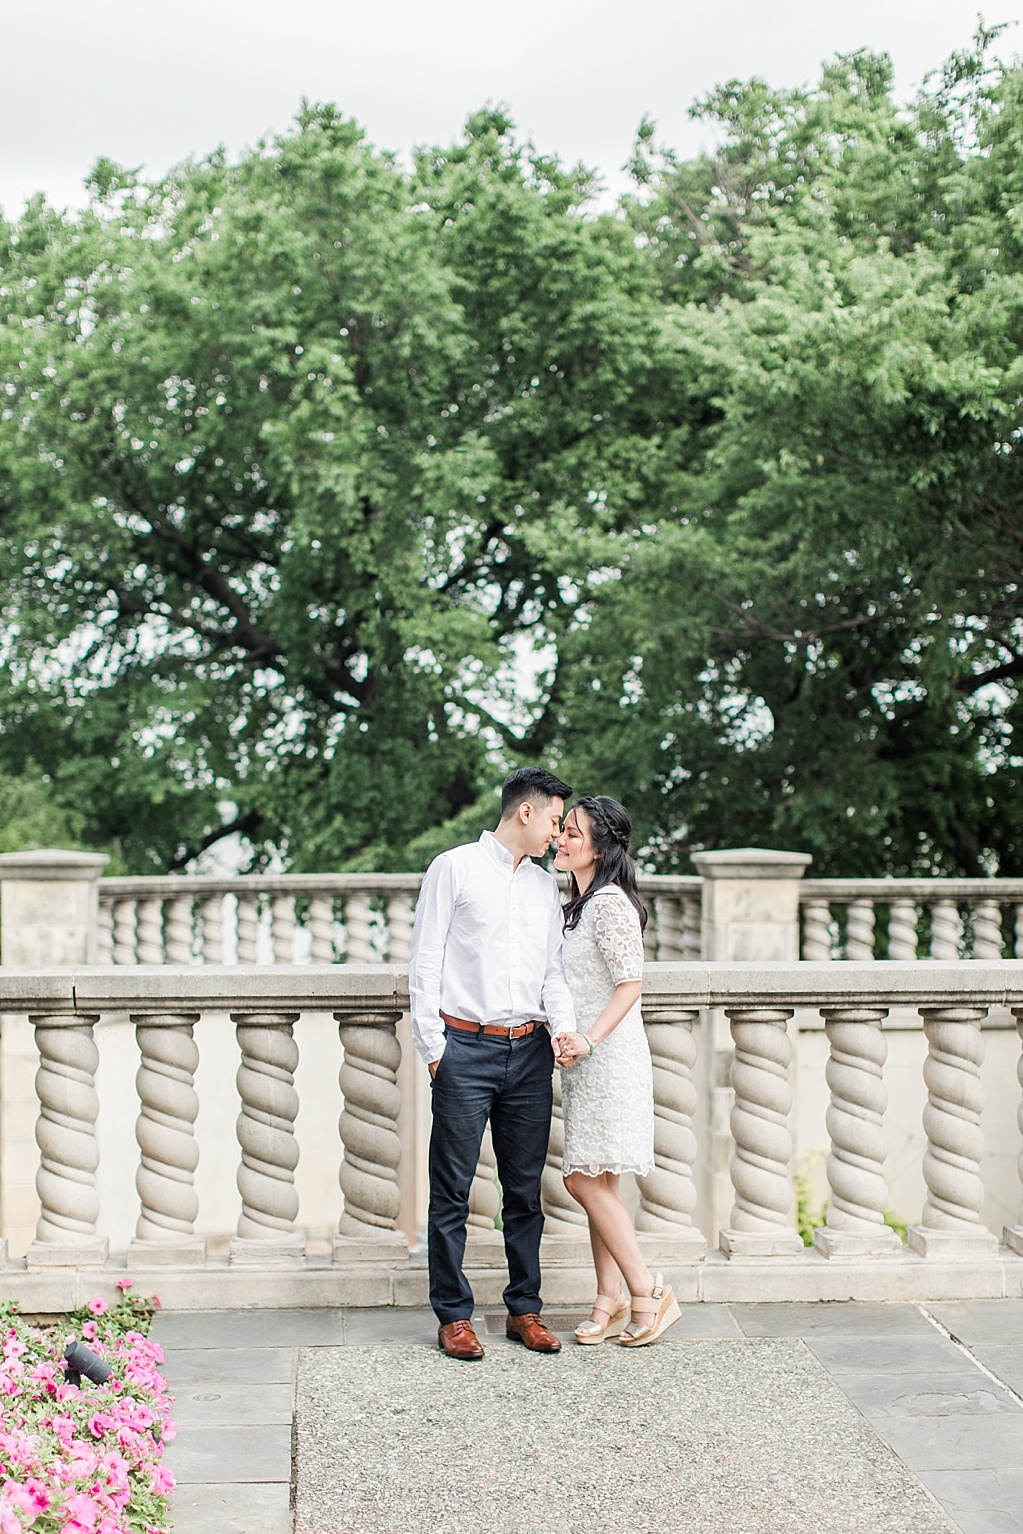 An Elegant Spring Engagement Session at the Dallas Arboretum and Botanical Gardens by Allison Jeffers Wedding Photography 0053